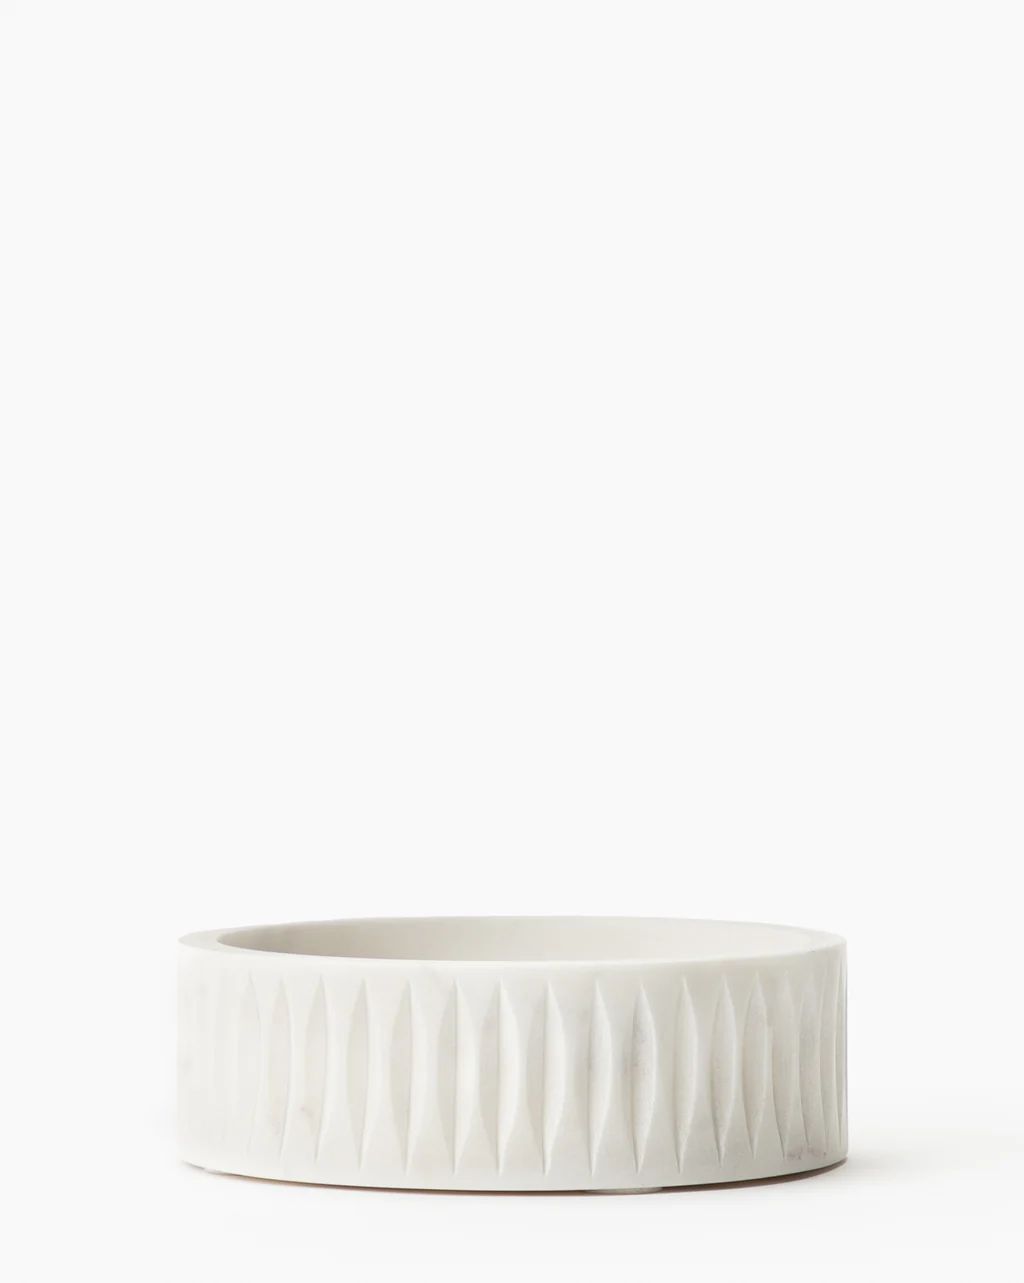 Carved Marble Bowl | McGee & Co.